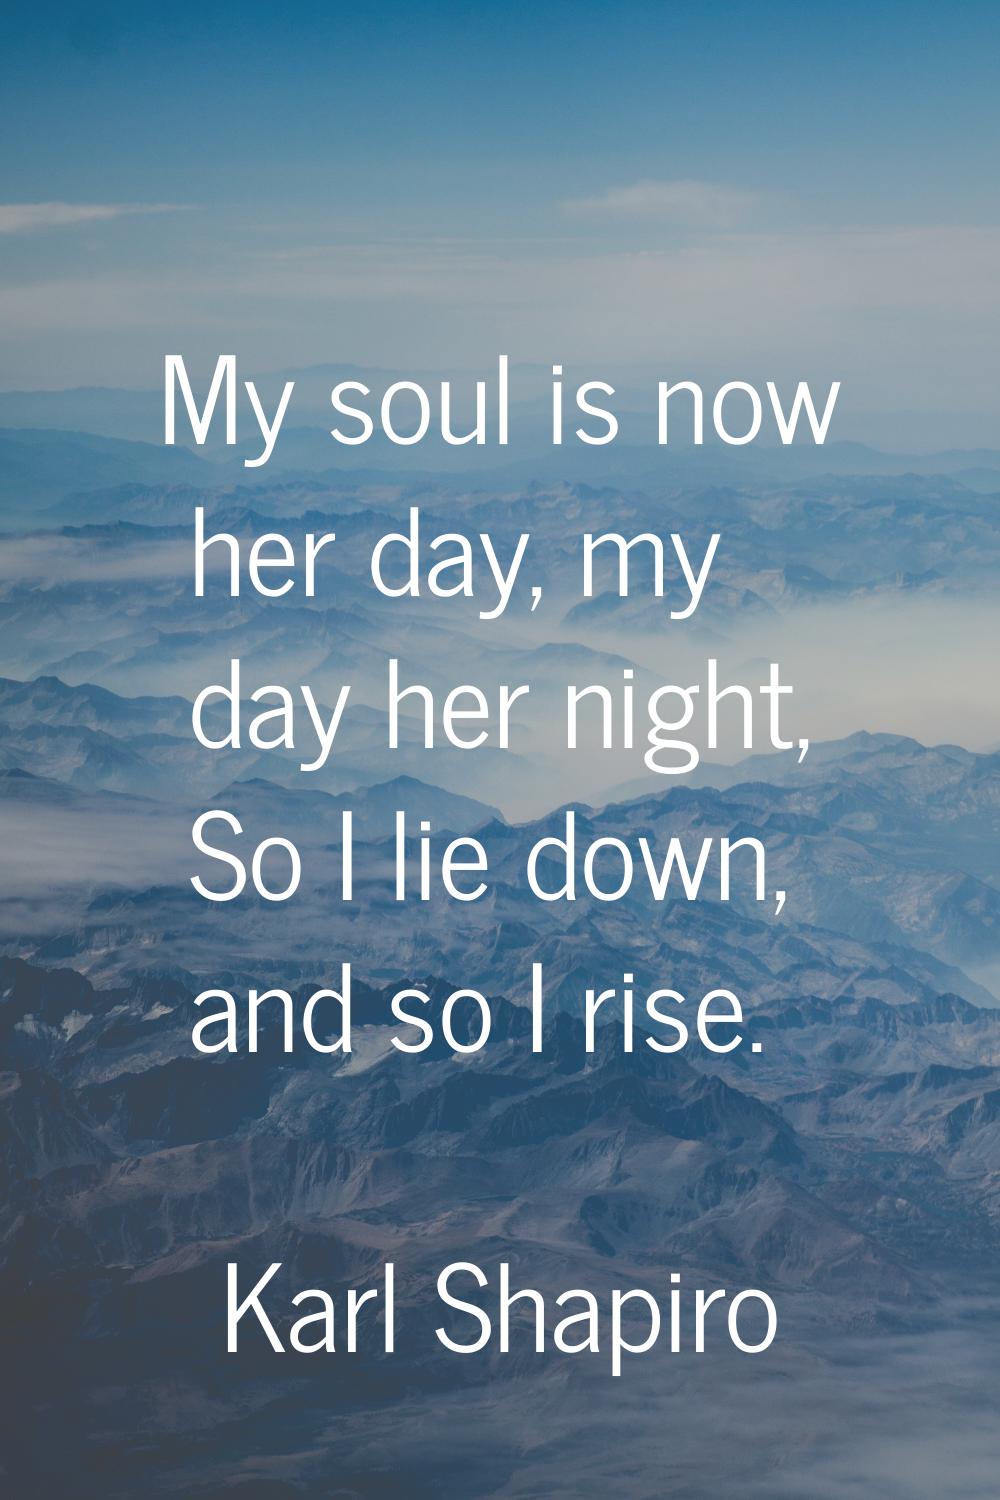 My soul is now her day, my day her night, So I lie down, and so I rise.